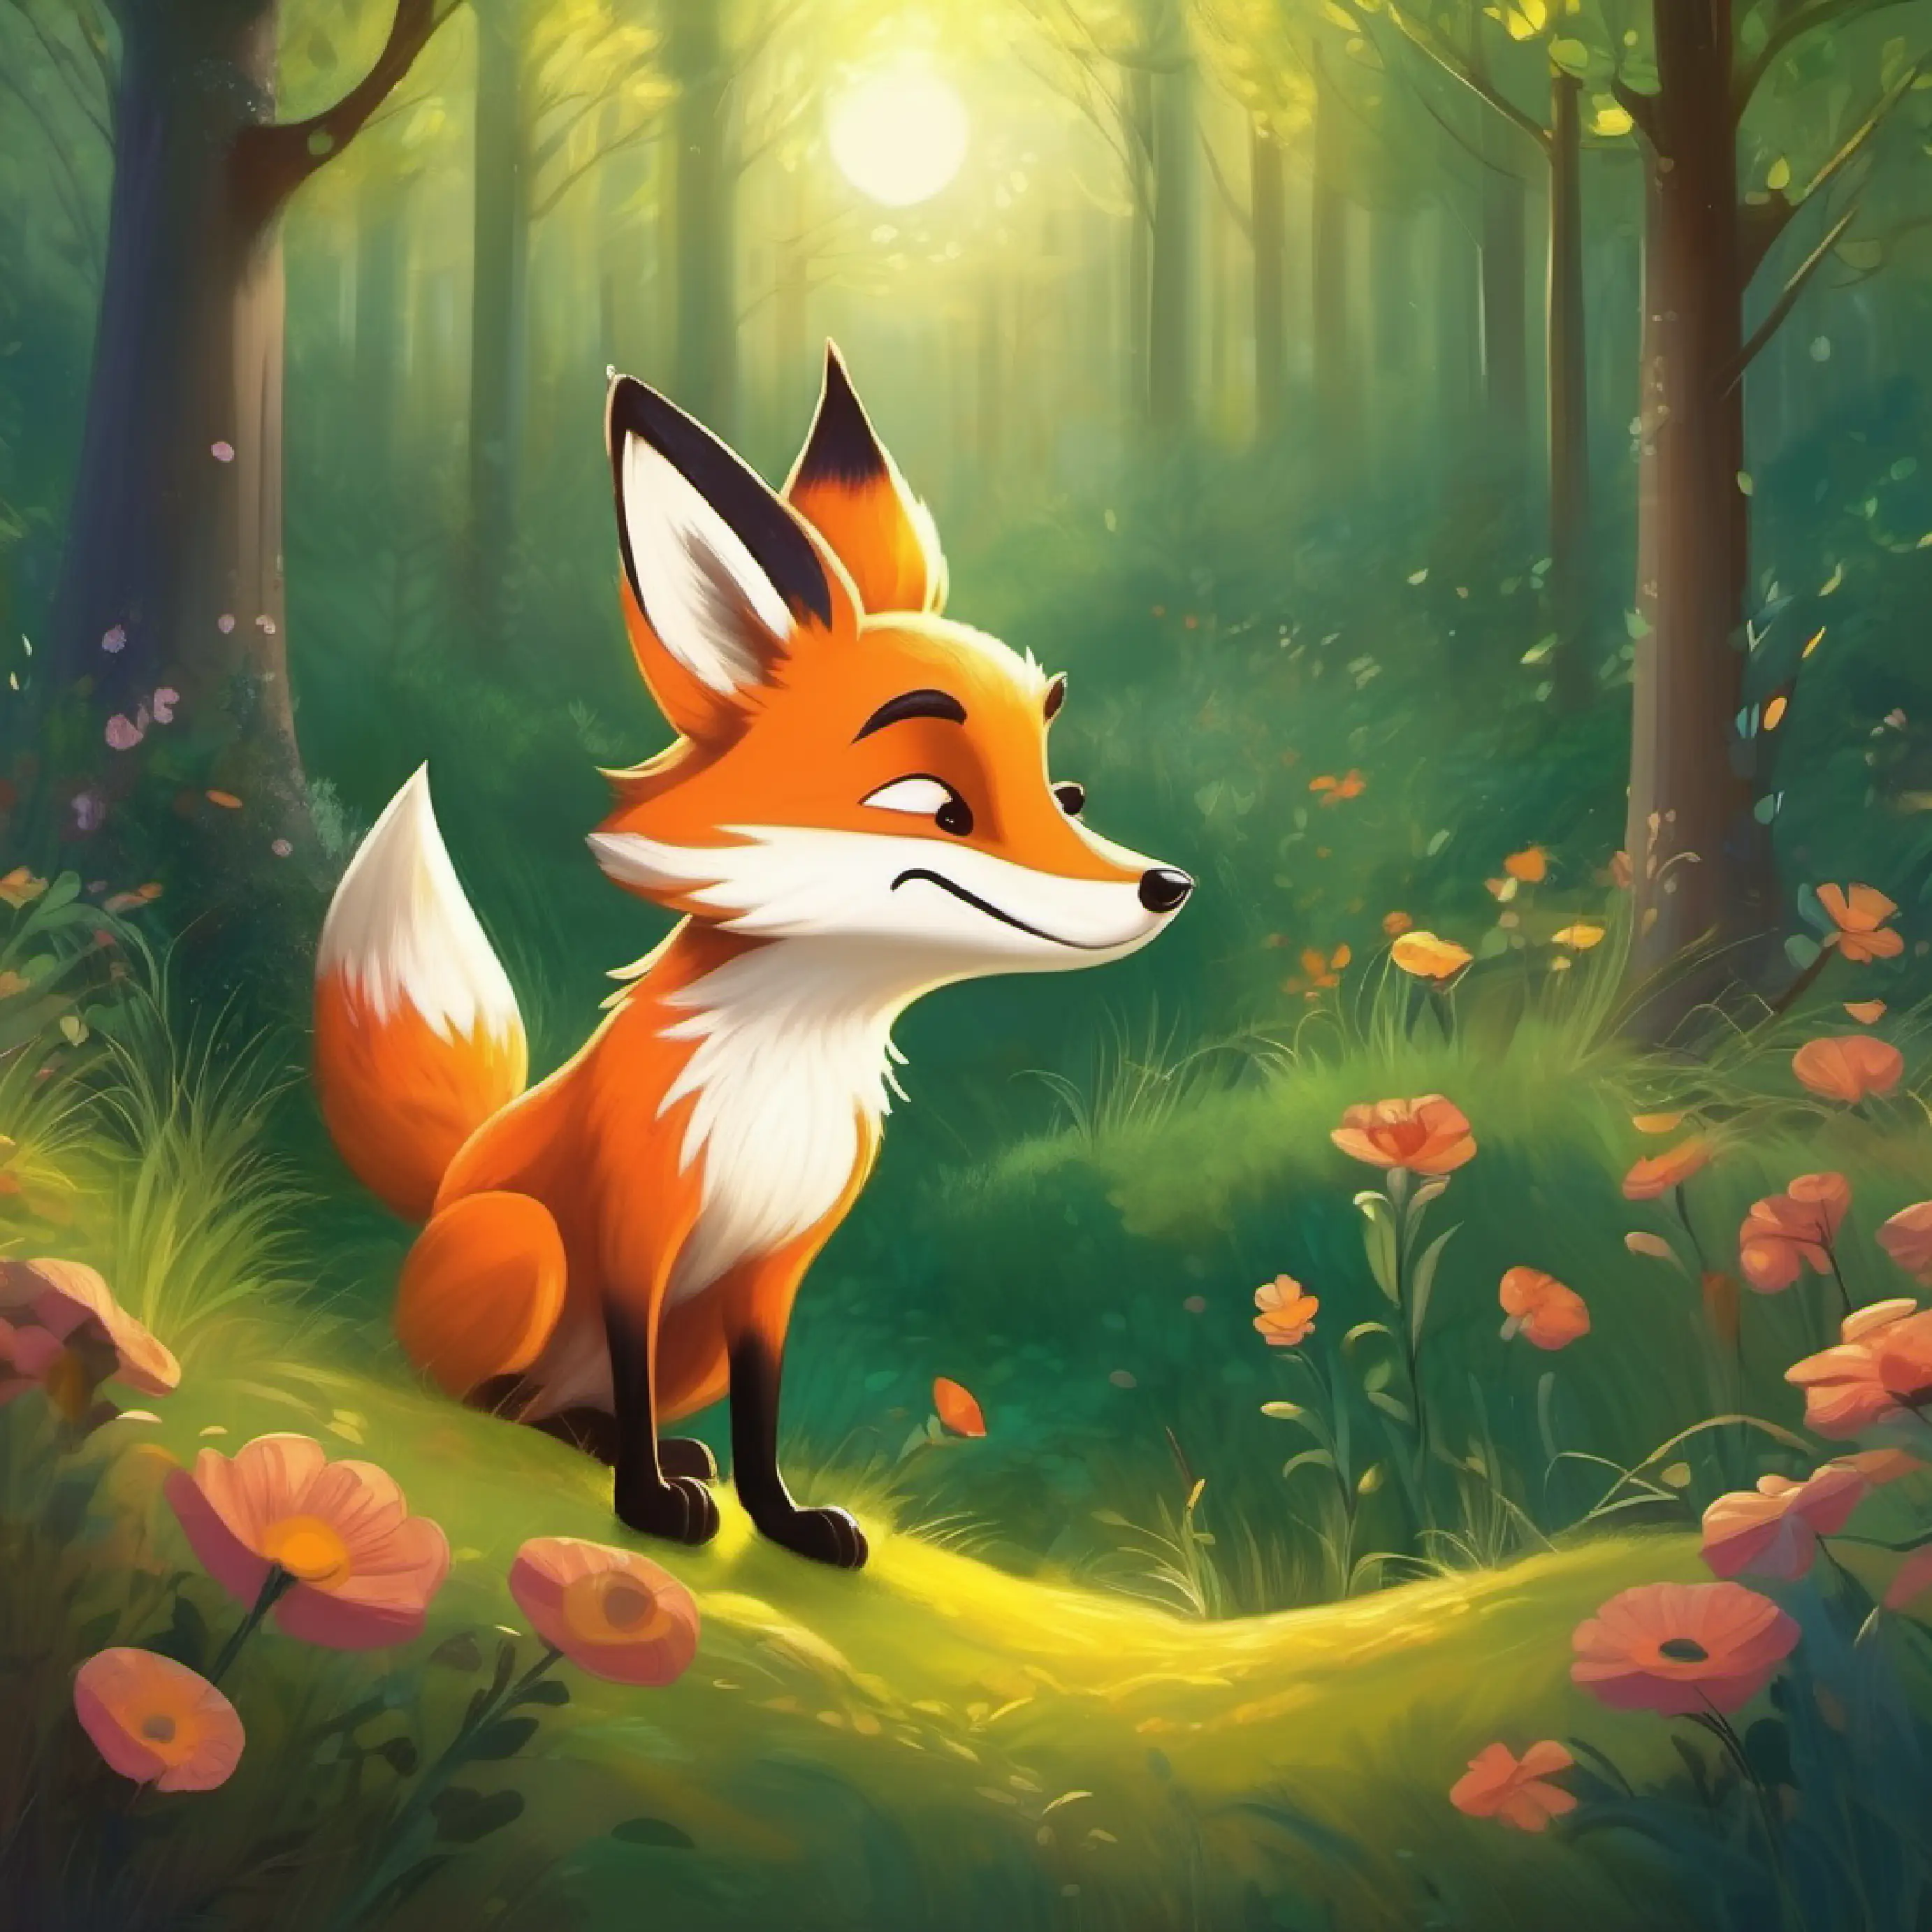 Landing in a clearing, meeting A shy fox with a bushy tail, who loves music the musical fox.